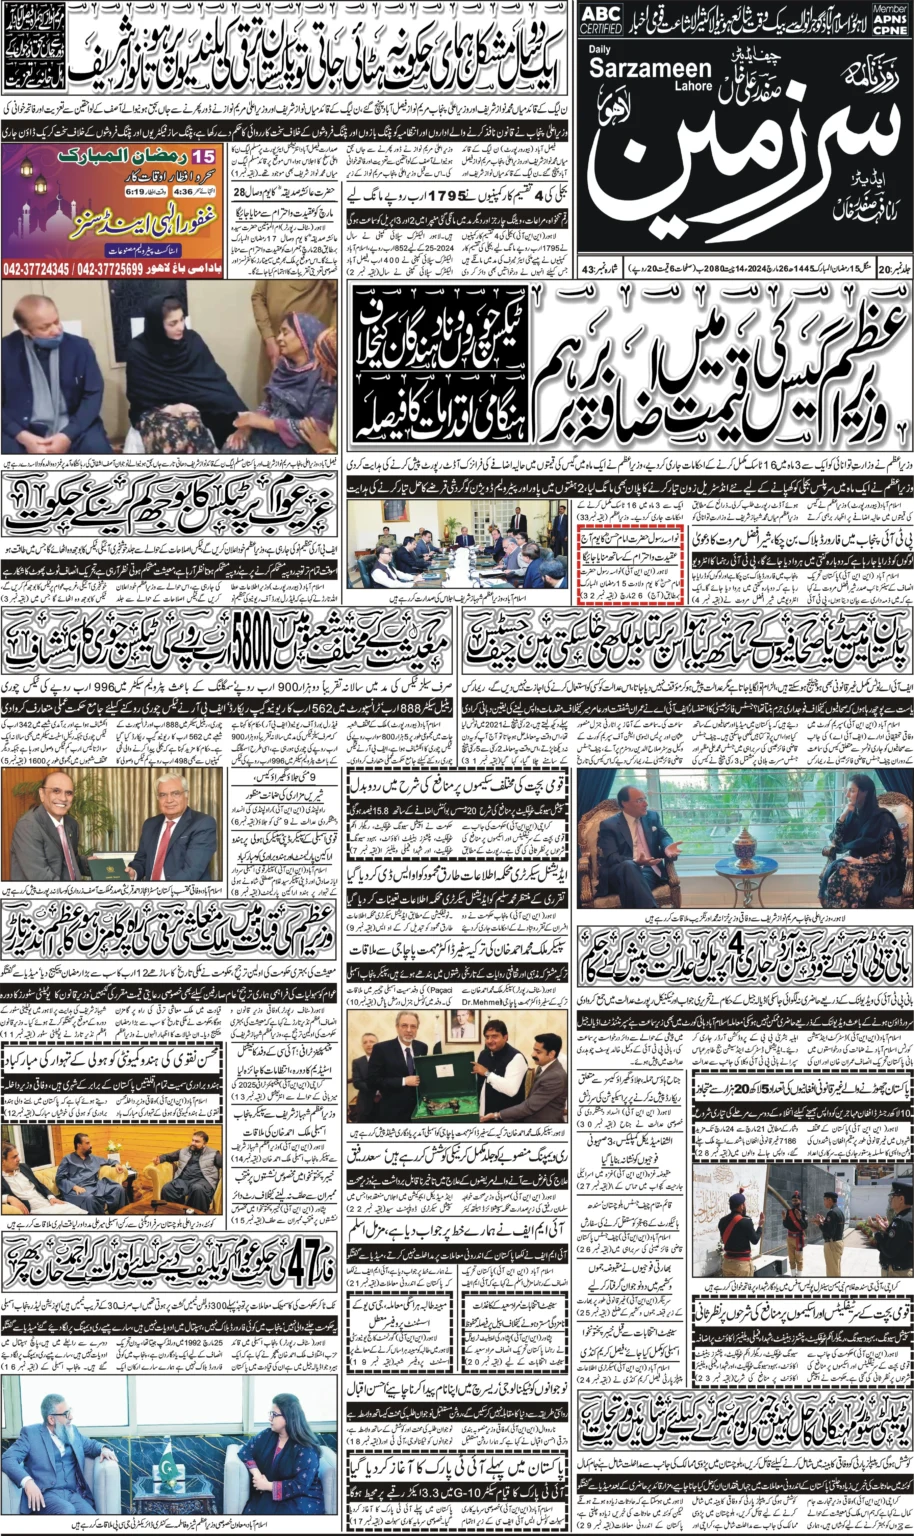 Daily |Pakistan| Islamabad | news| chief justice | law| today